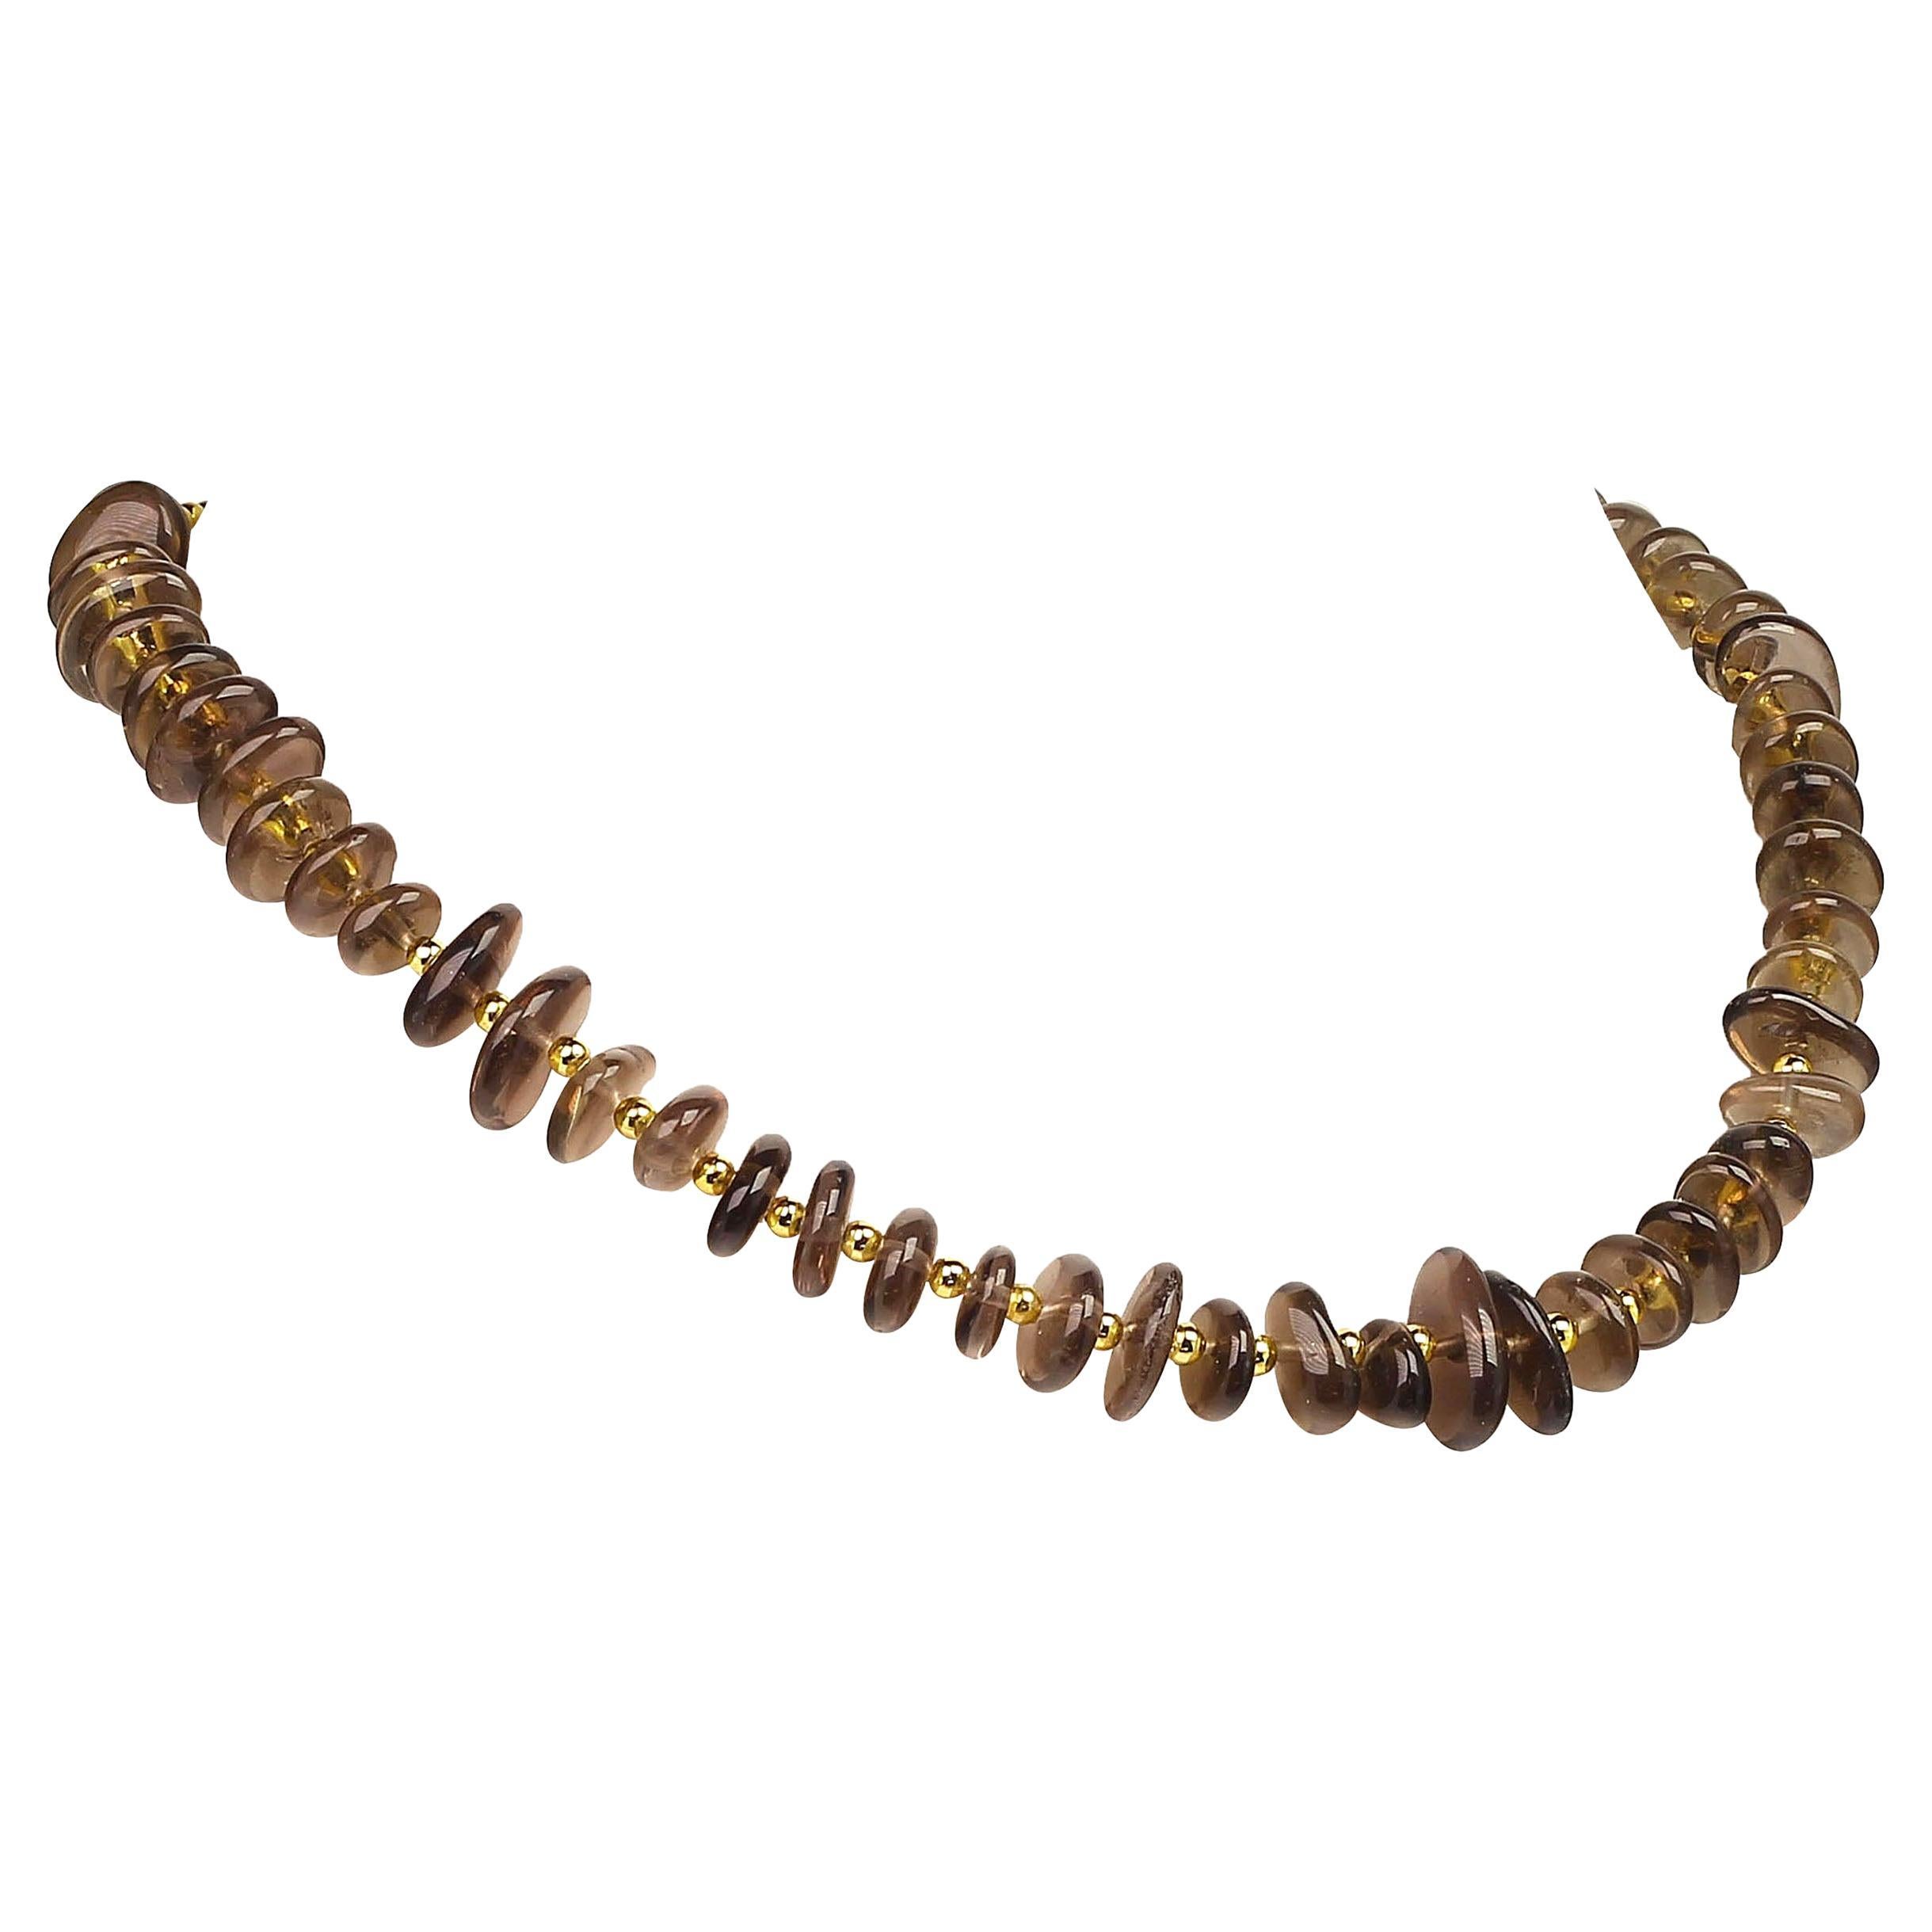 Artisan AJD 16 Inch Smoky Quartz Necklace with Goldy Accents For Sale